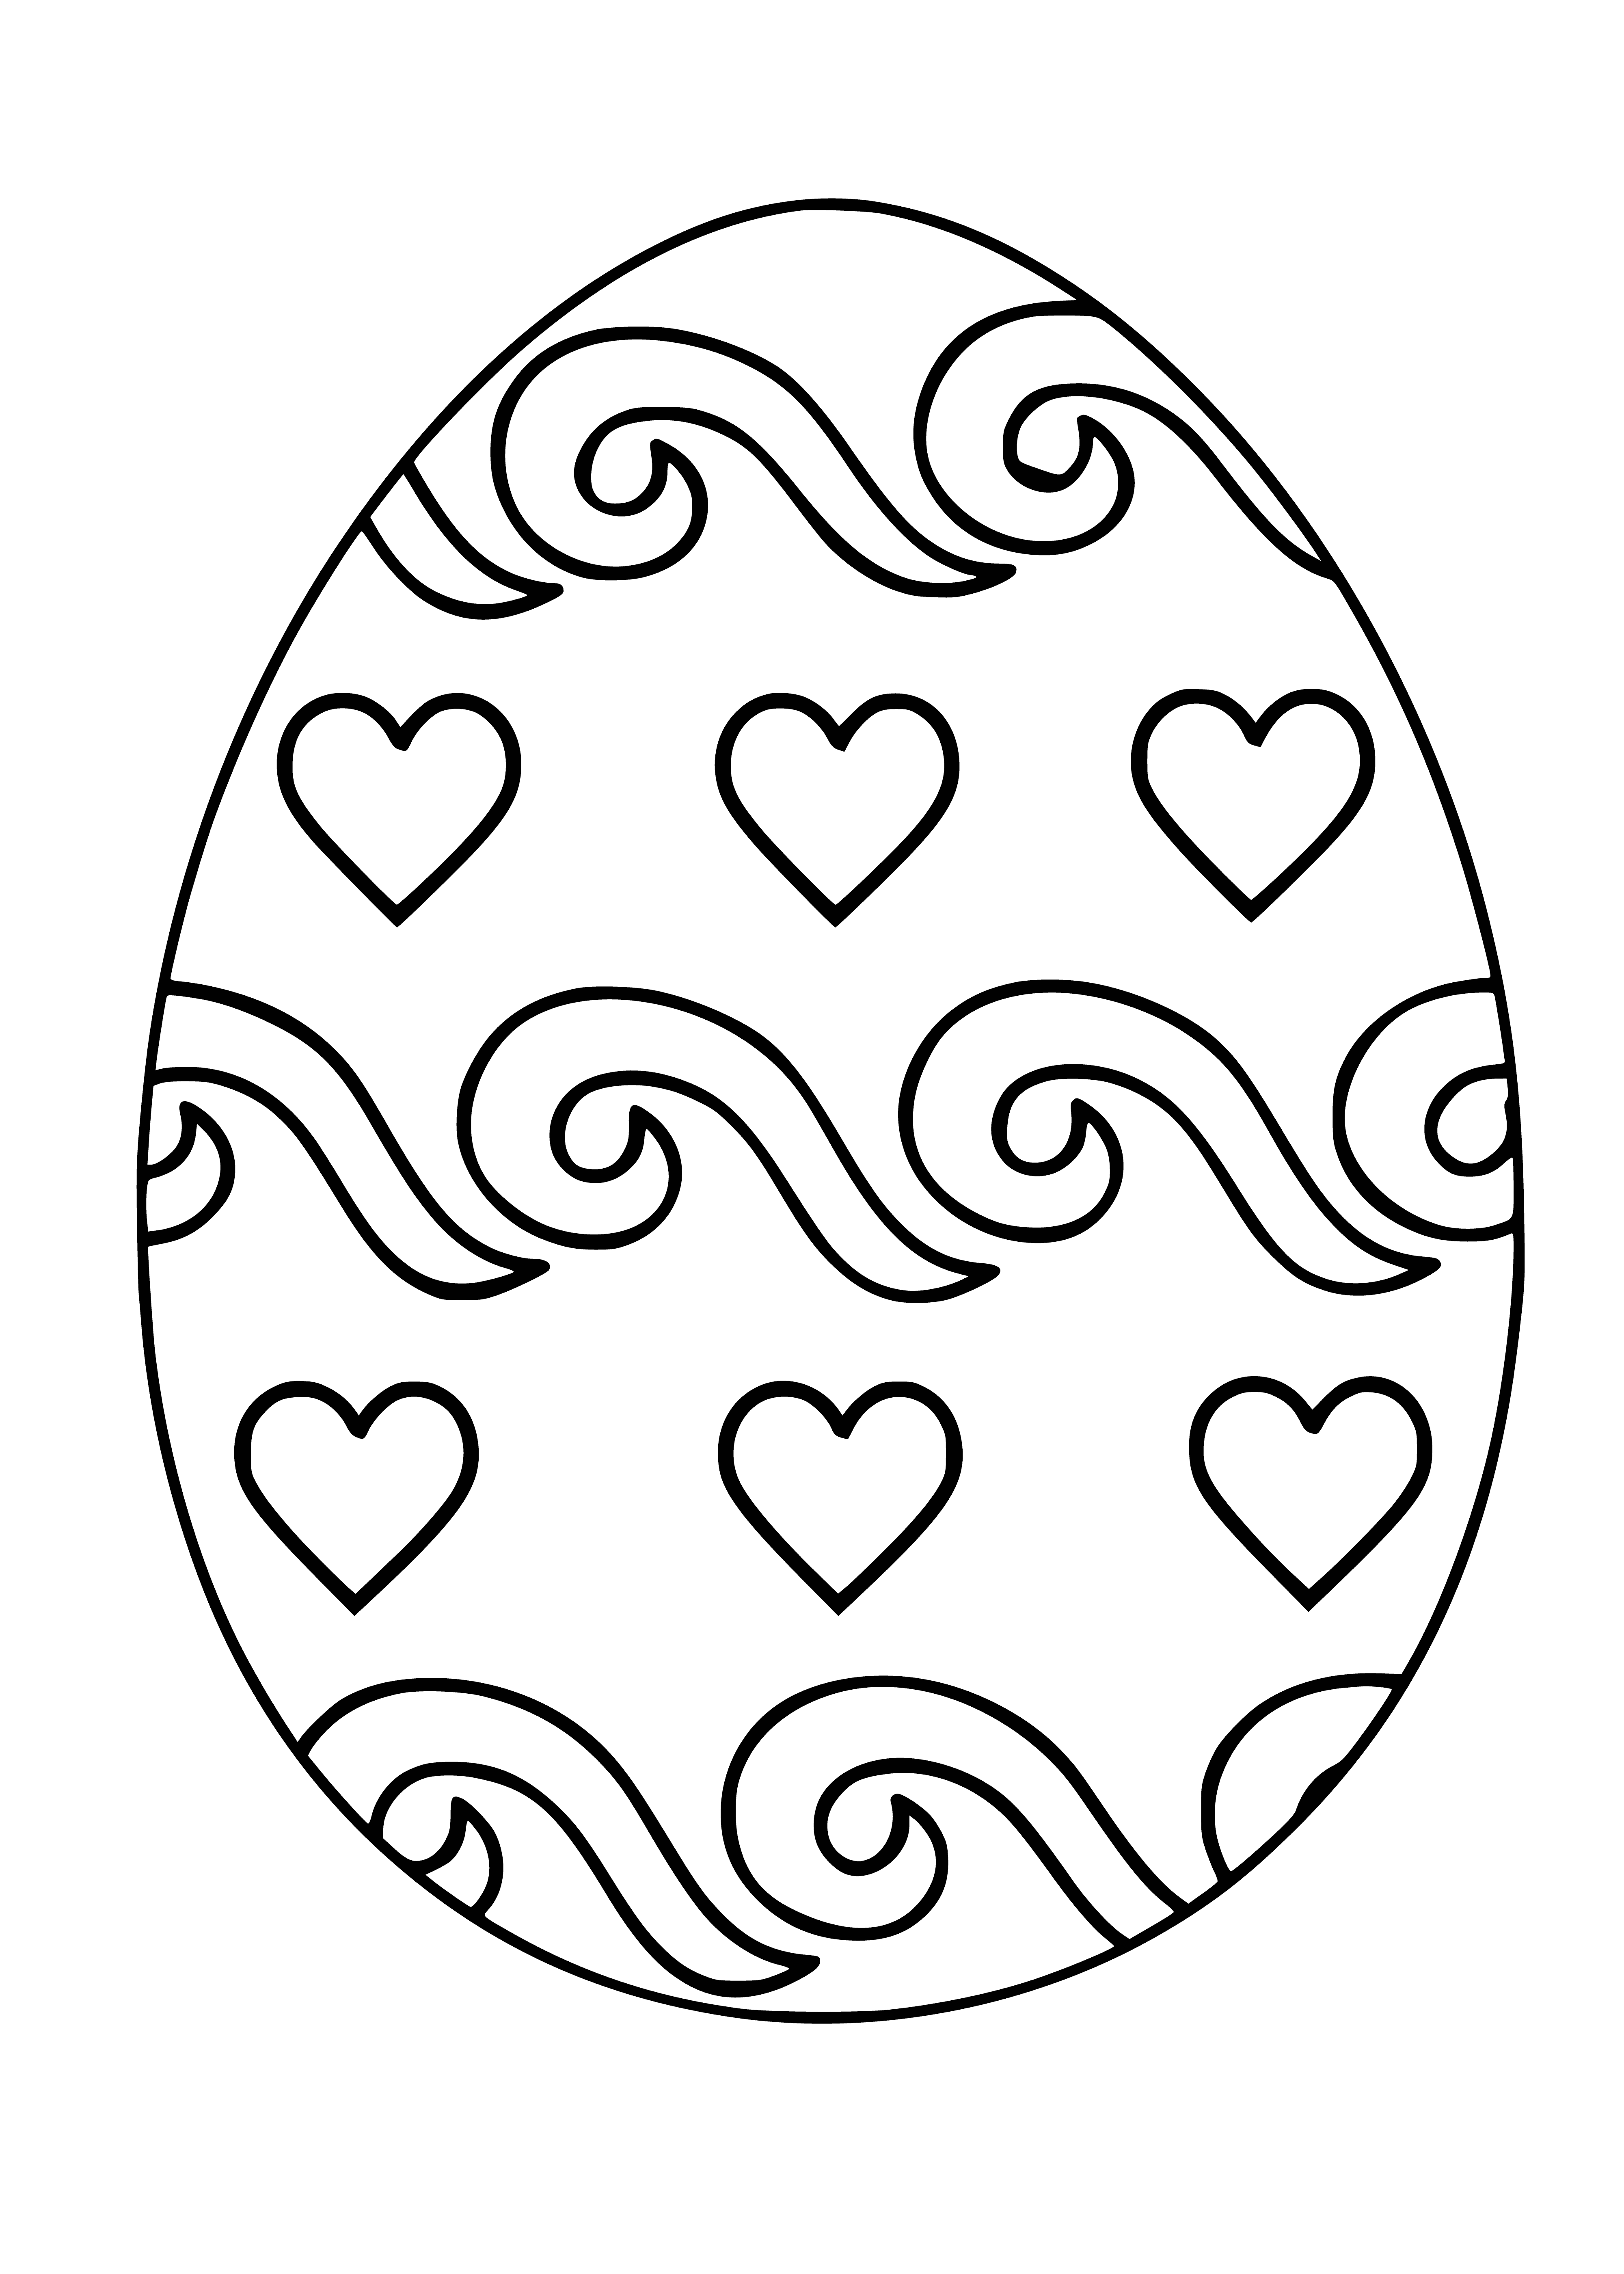 coloring page: 3 Easter eggs, yellow w/ stripes, green w/ dots, pink w/ flowers. Different designs decorated on each.